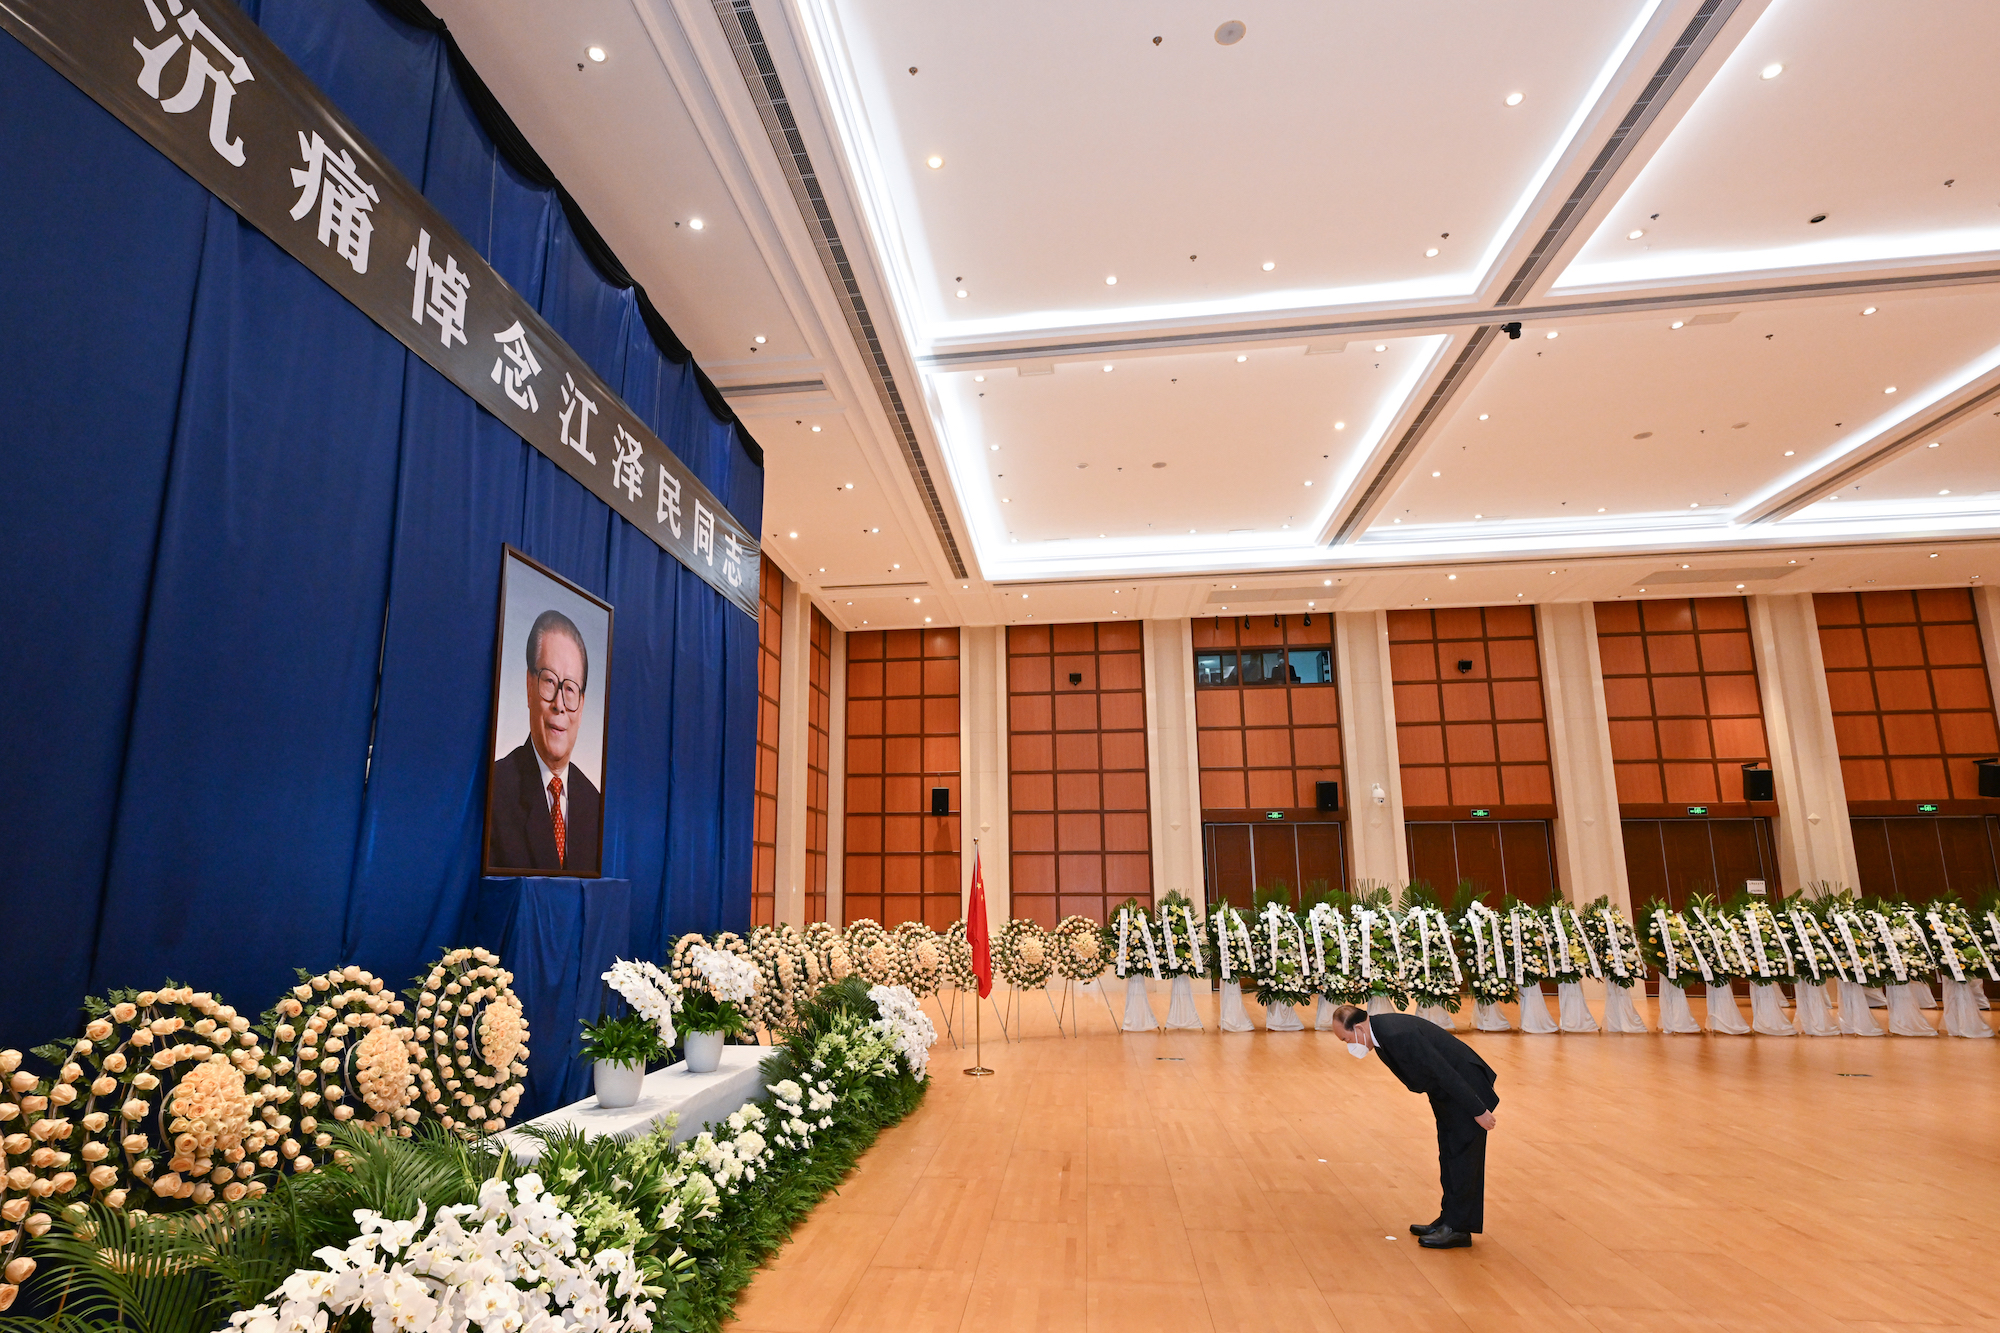 Macao will join Jiang Zemin’s memorial live broadcast starting at 10 am tomorrow